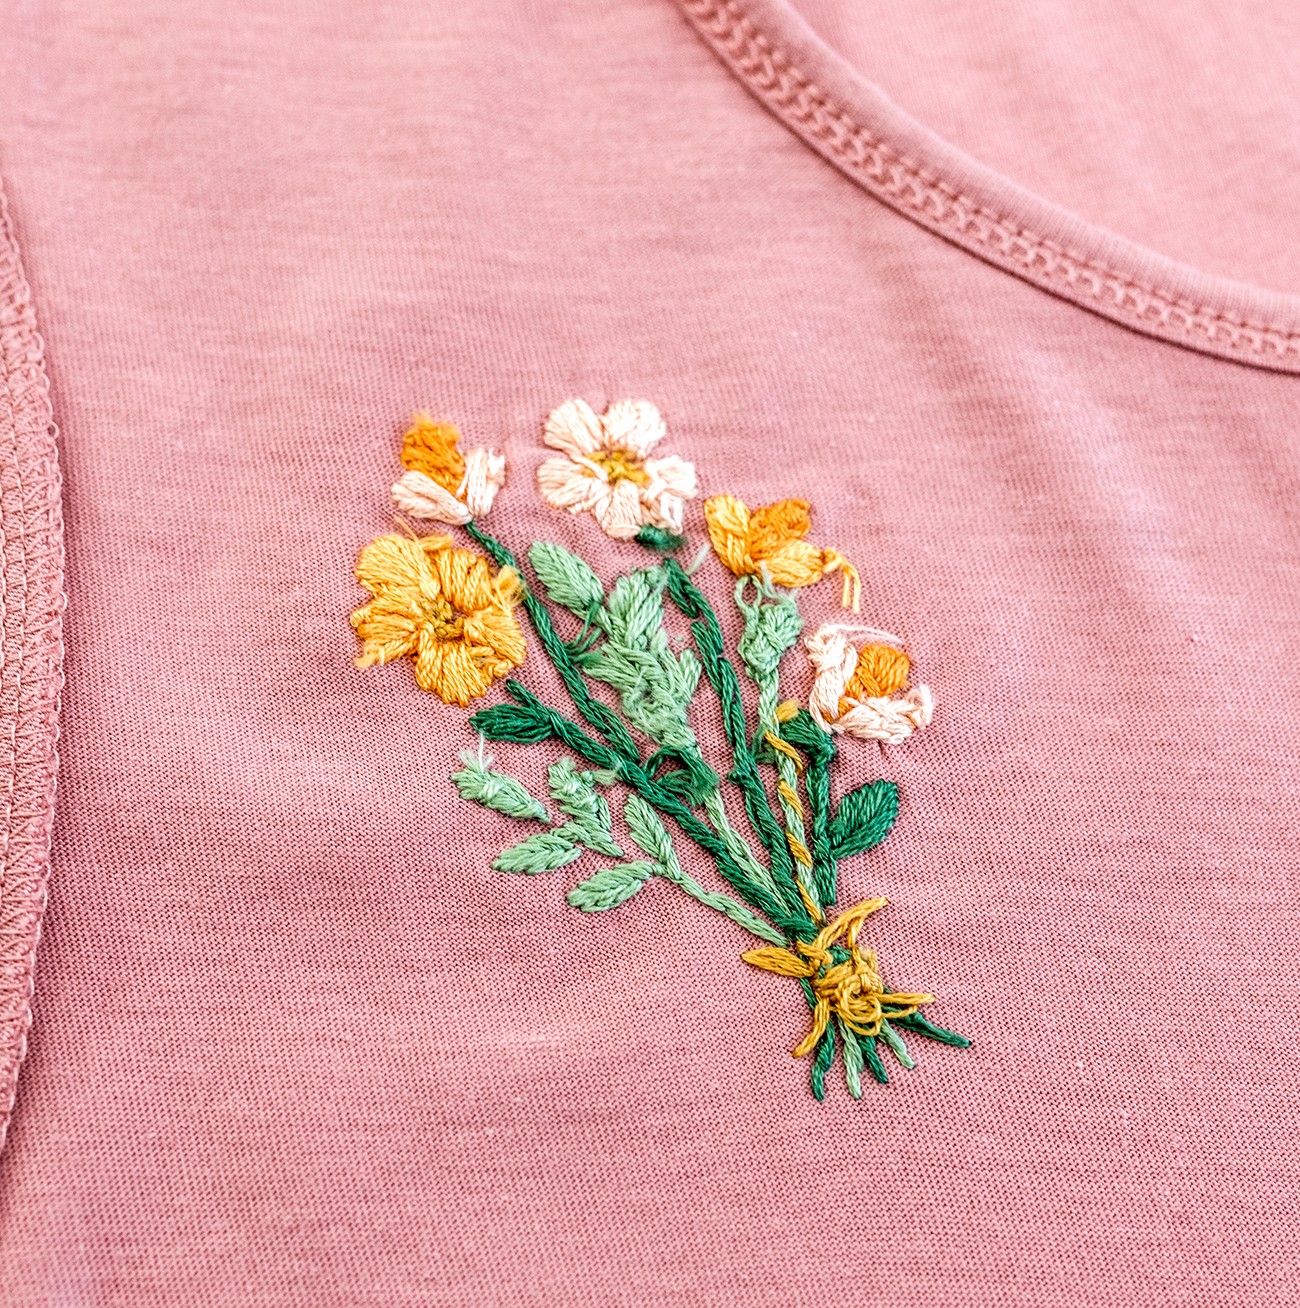 The back of an embroidered floral design is shown.